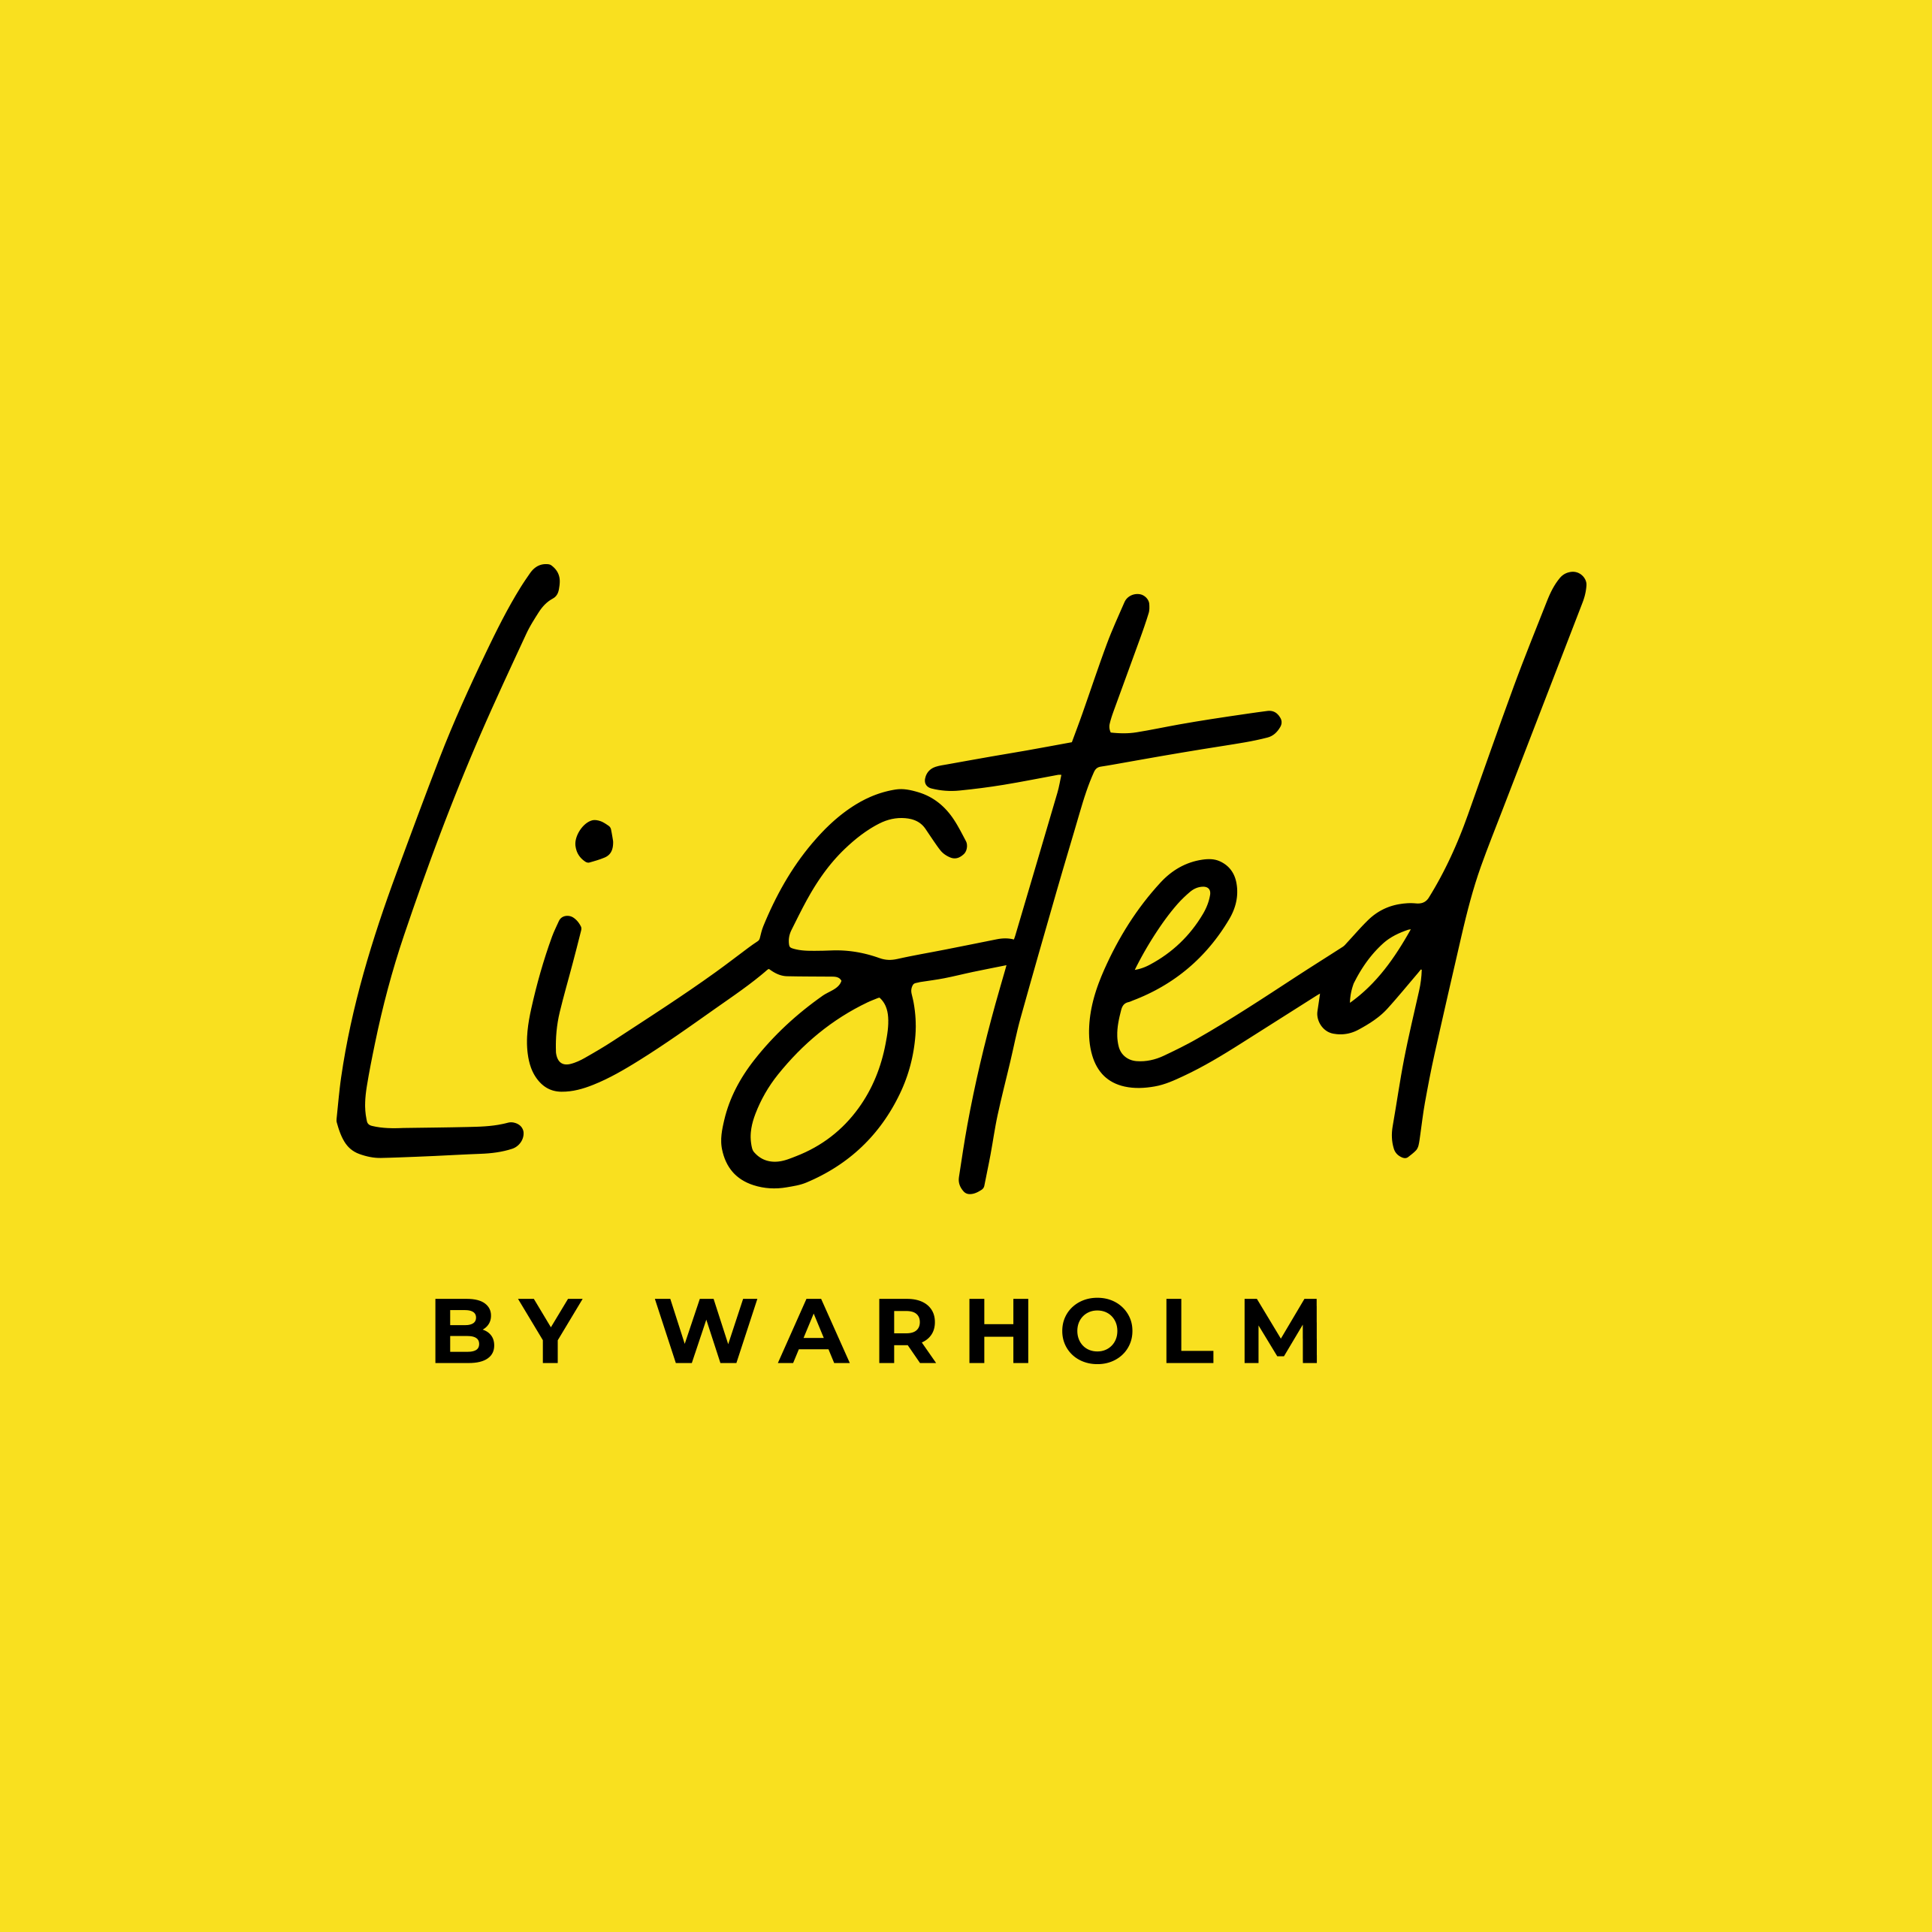 Listed by Warholm